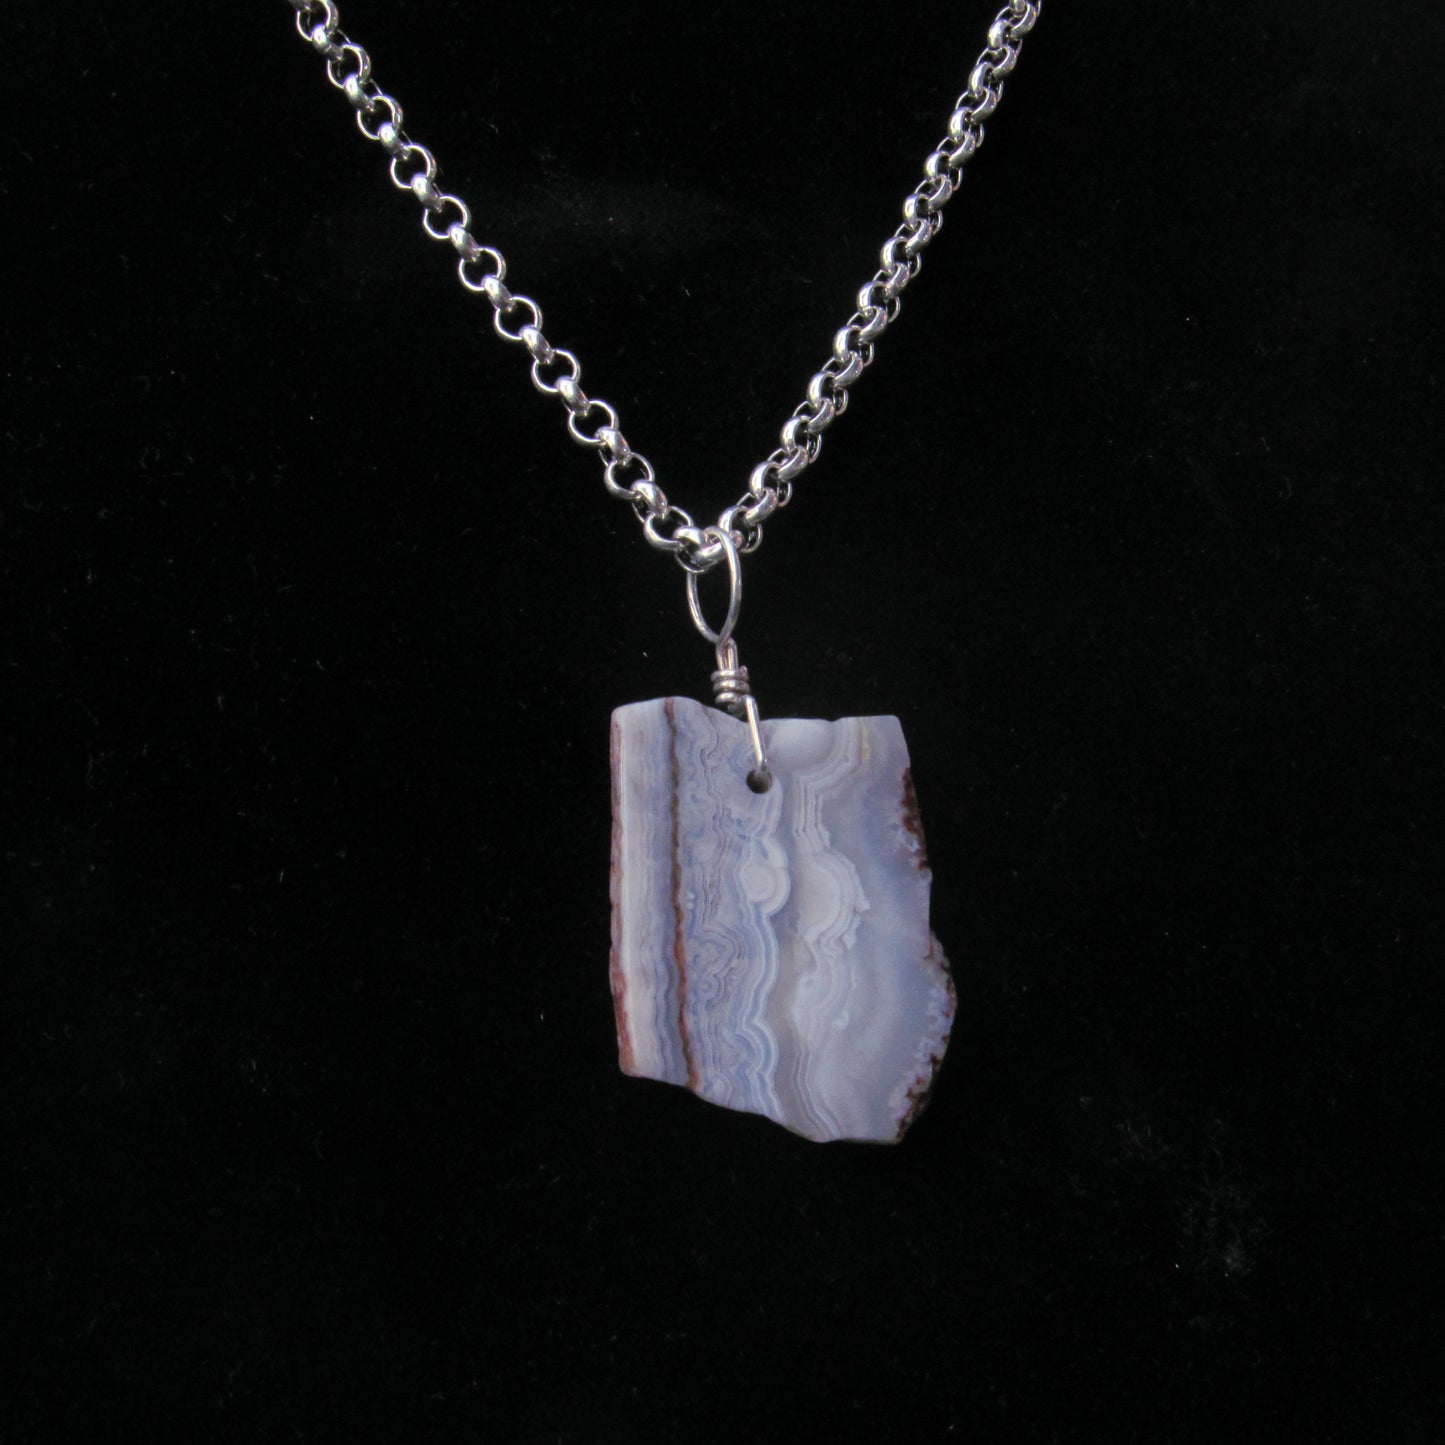 Crazy Lace Agate gemstone on Sterling Silver Chain